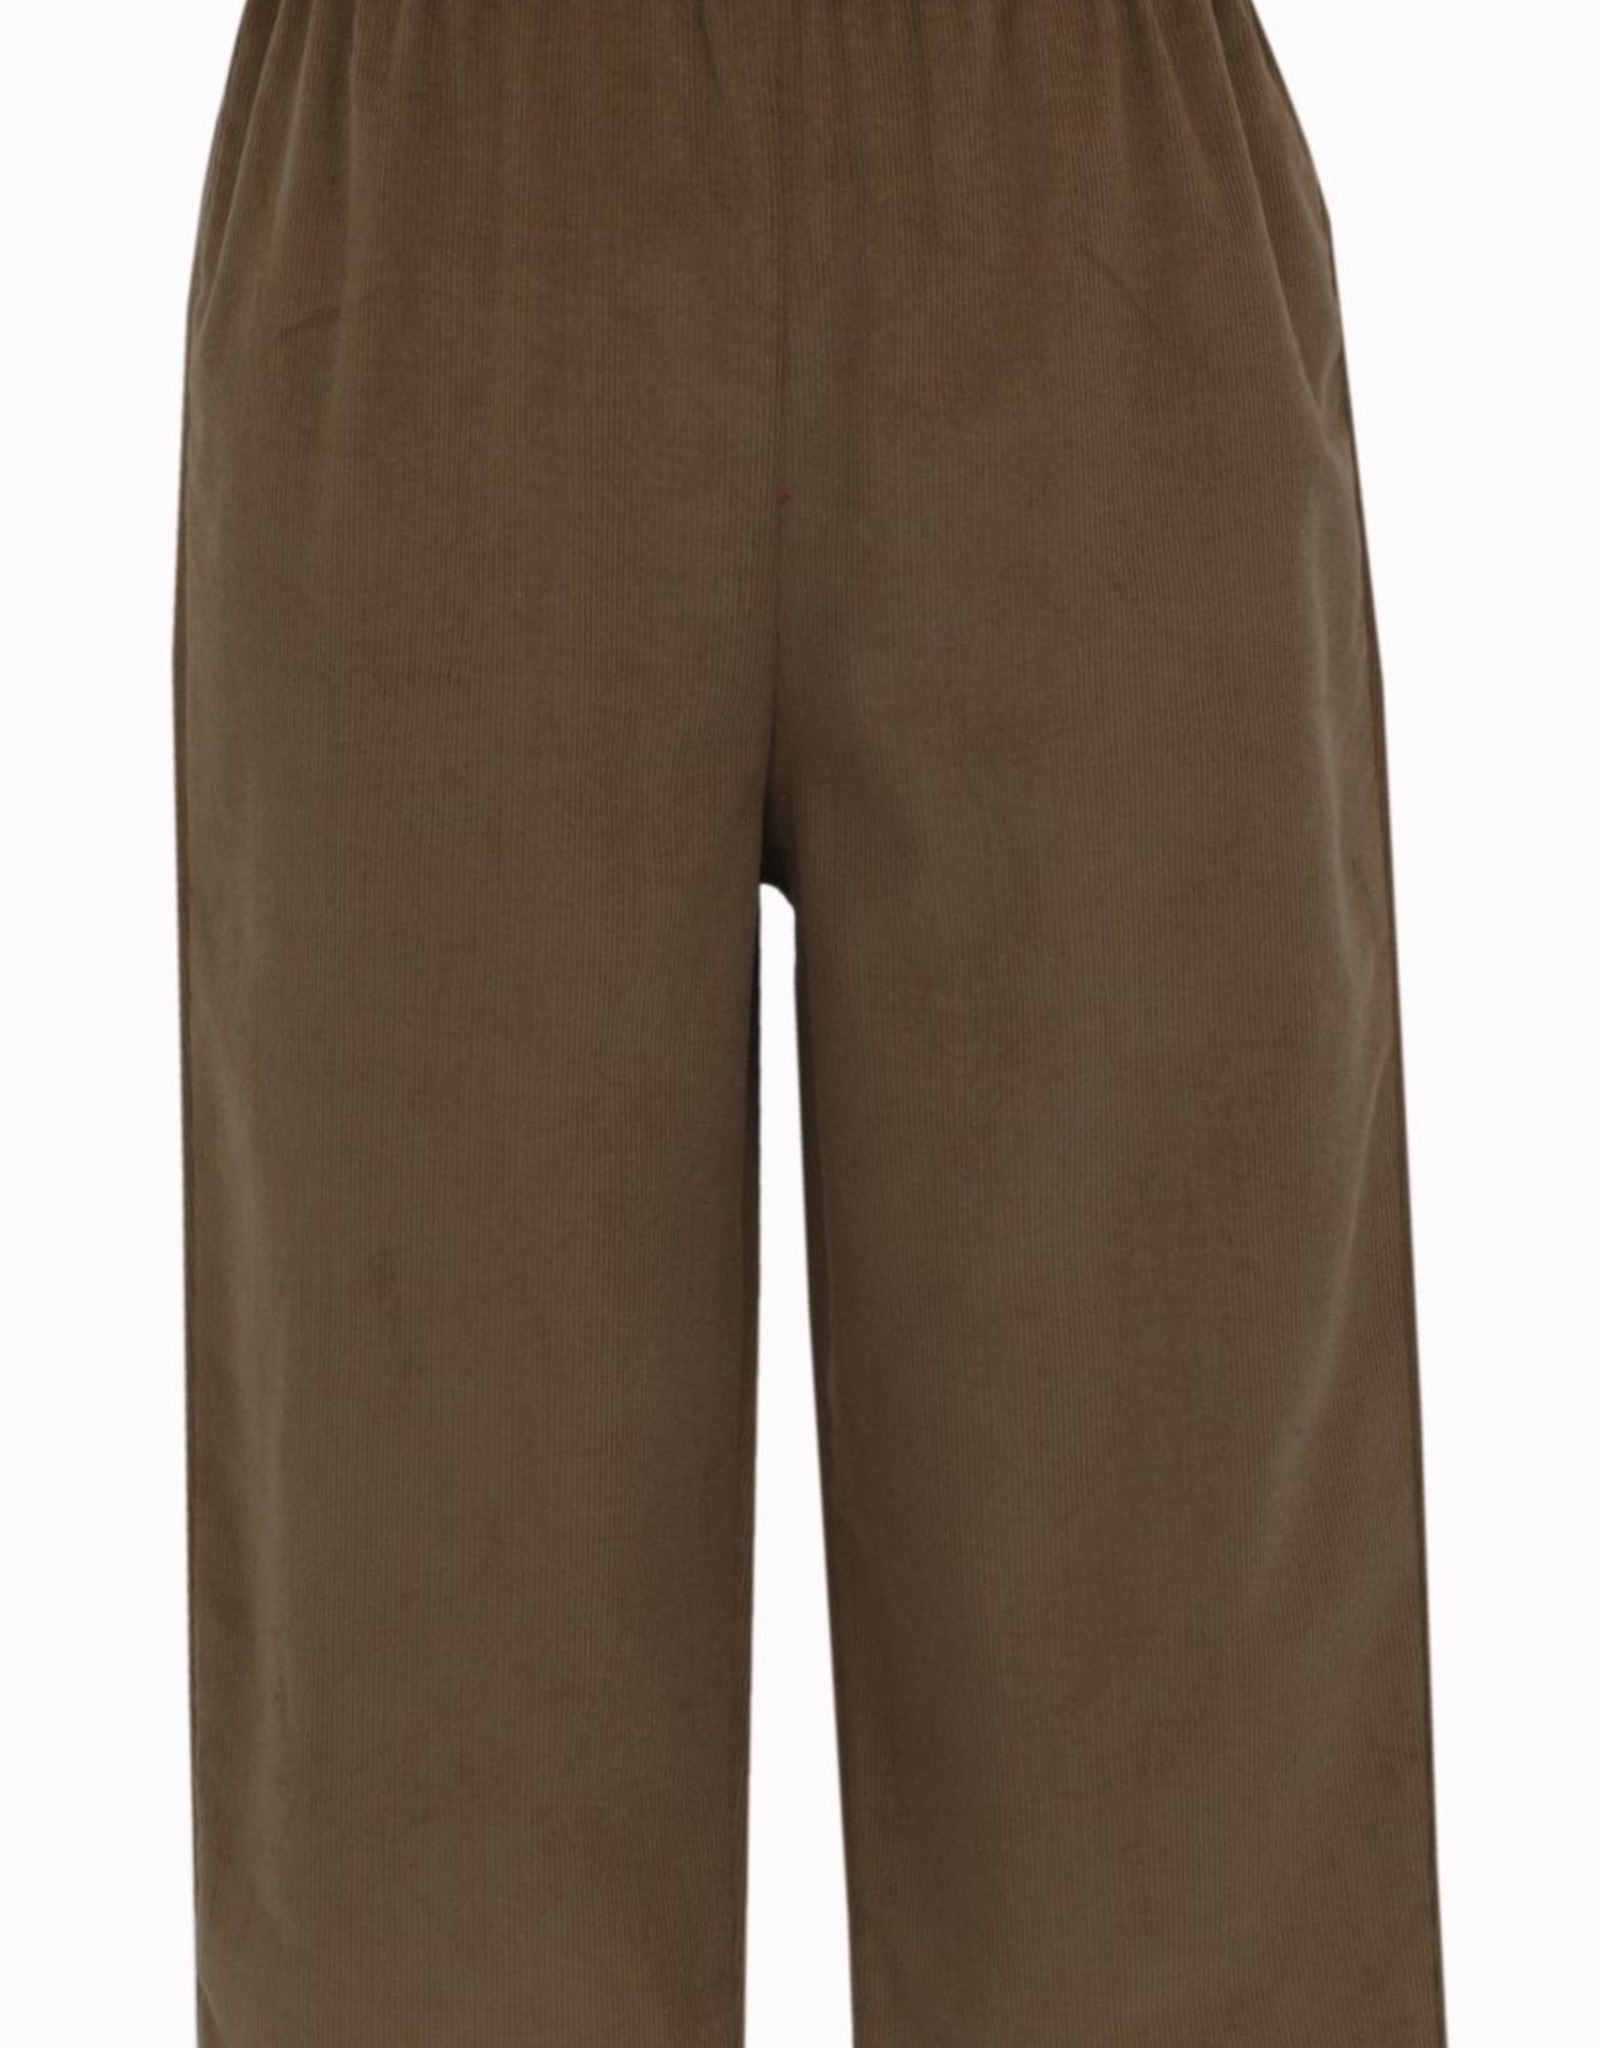 Claire and Charlie Boy's Camel Cord Pull On Pant